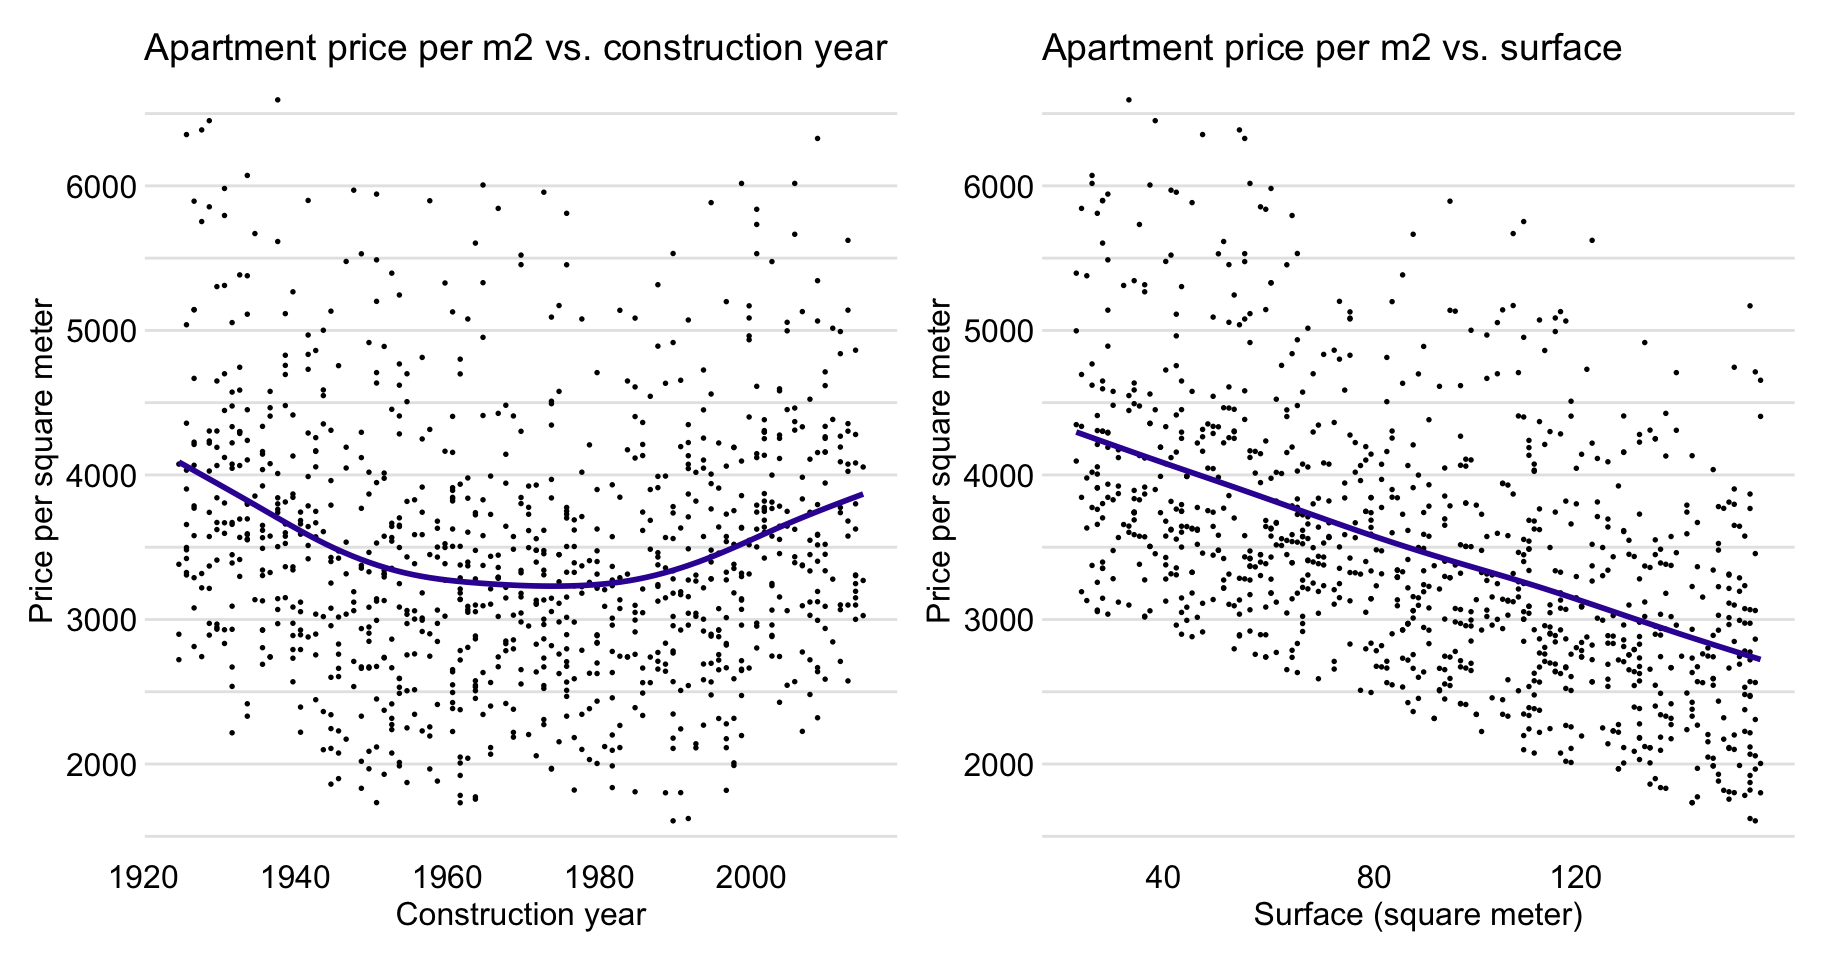 Apartment-prices data. Price per square meter vs. year of construction (left-hand-side panel) and vs. surface (right-hand-side panel).